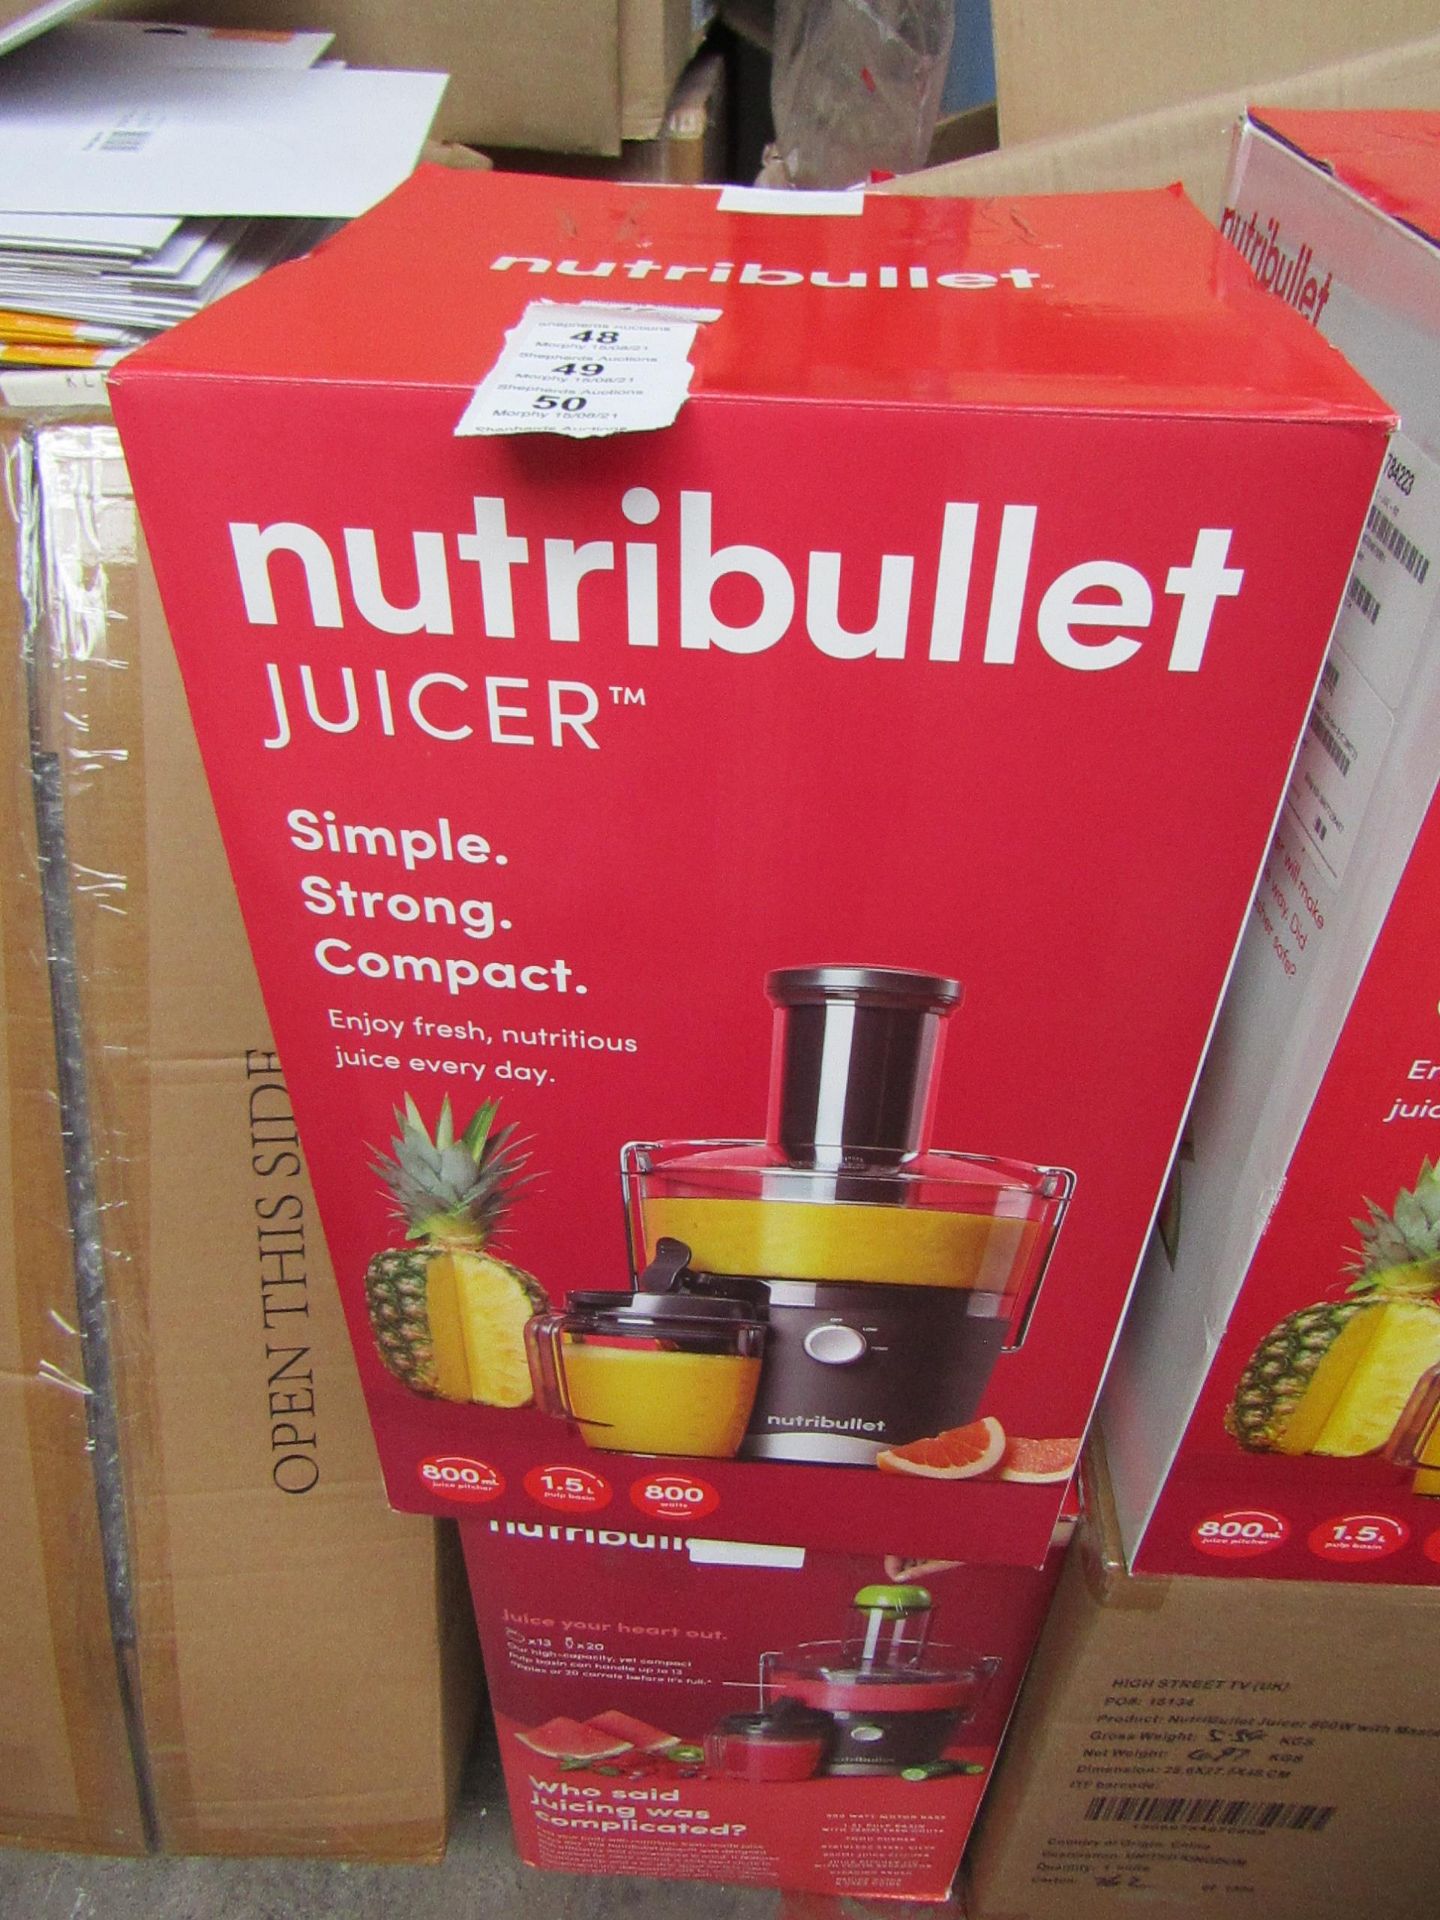 | 1x | NUTRIBULLET JUICER | PROFESSIONALLY REFURBISHED AND RE BOXED | NO ONLINE RESALE |RRP £99.